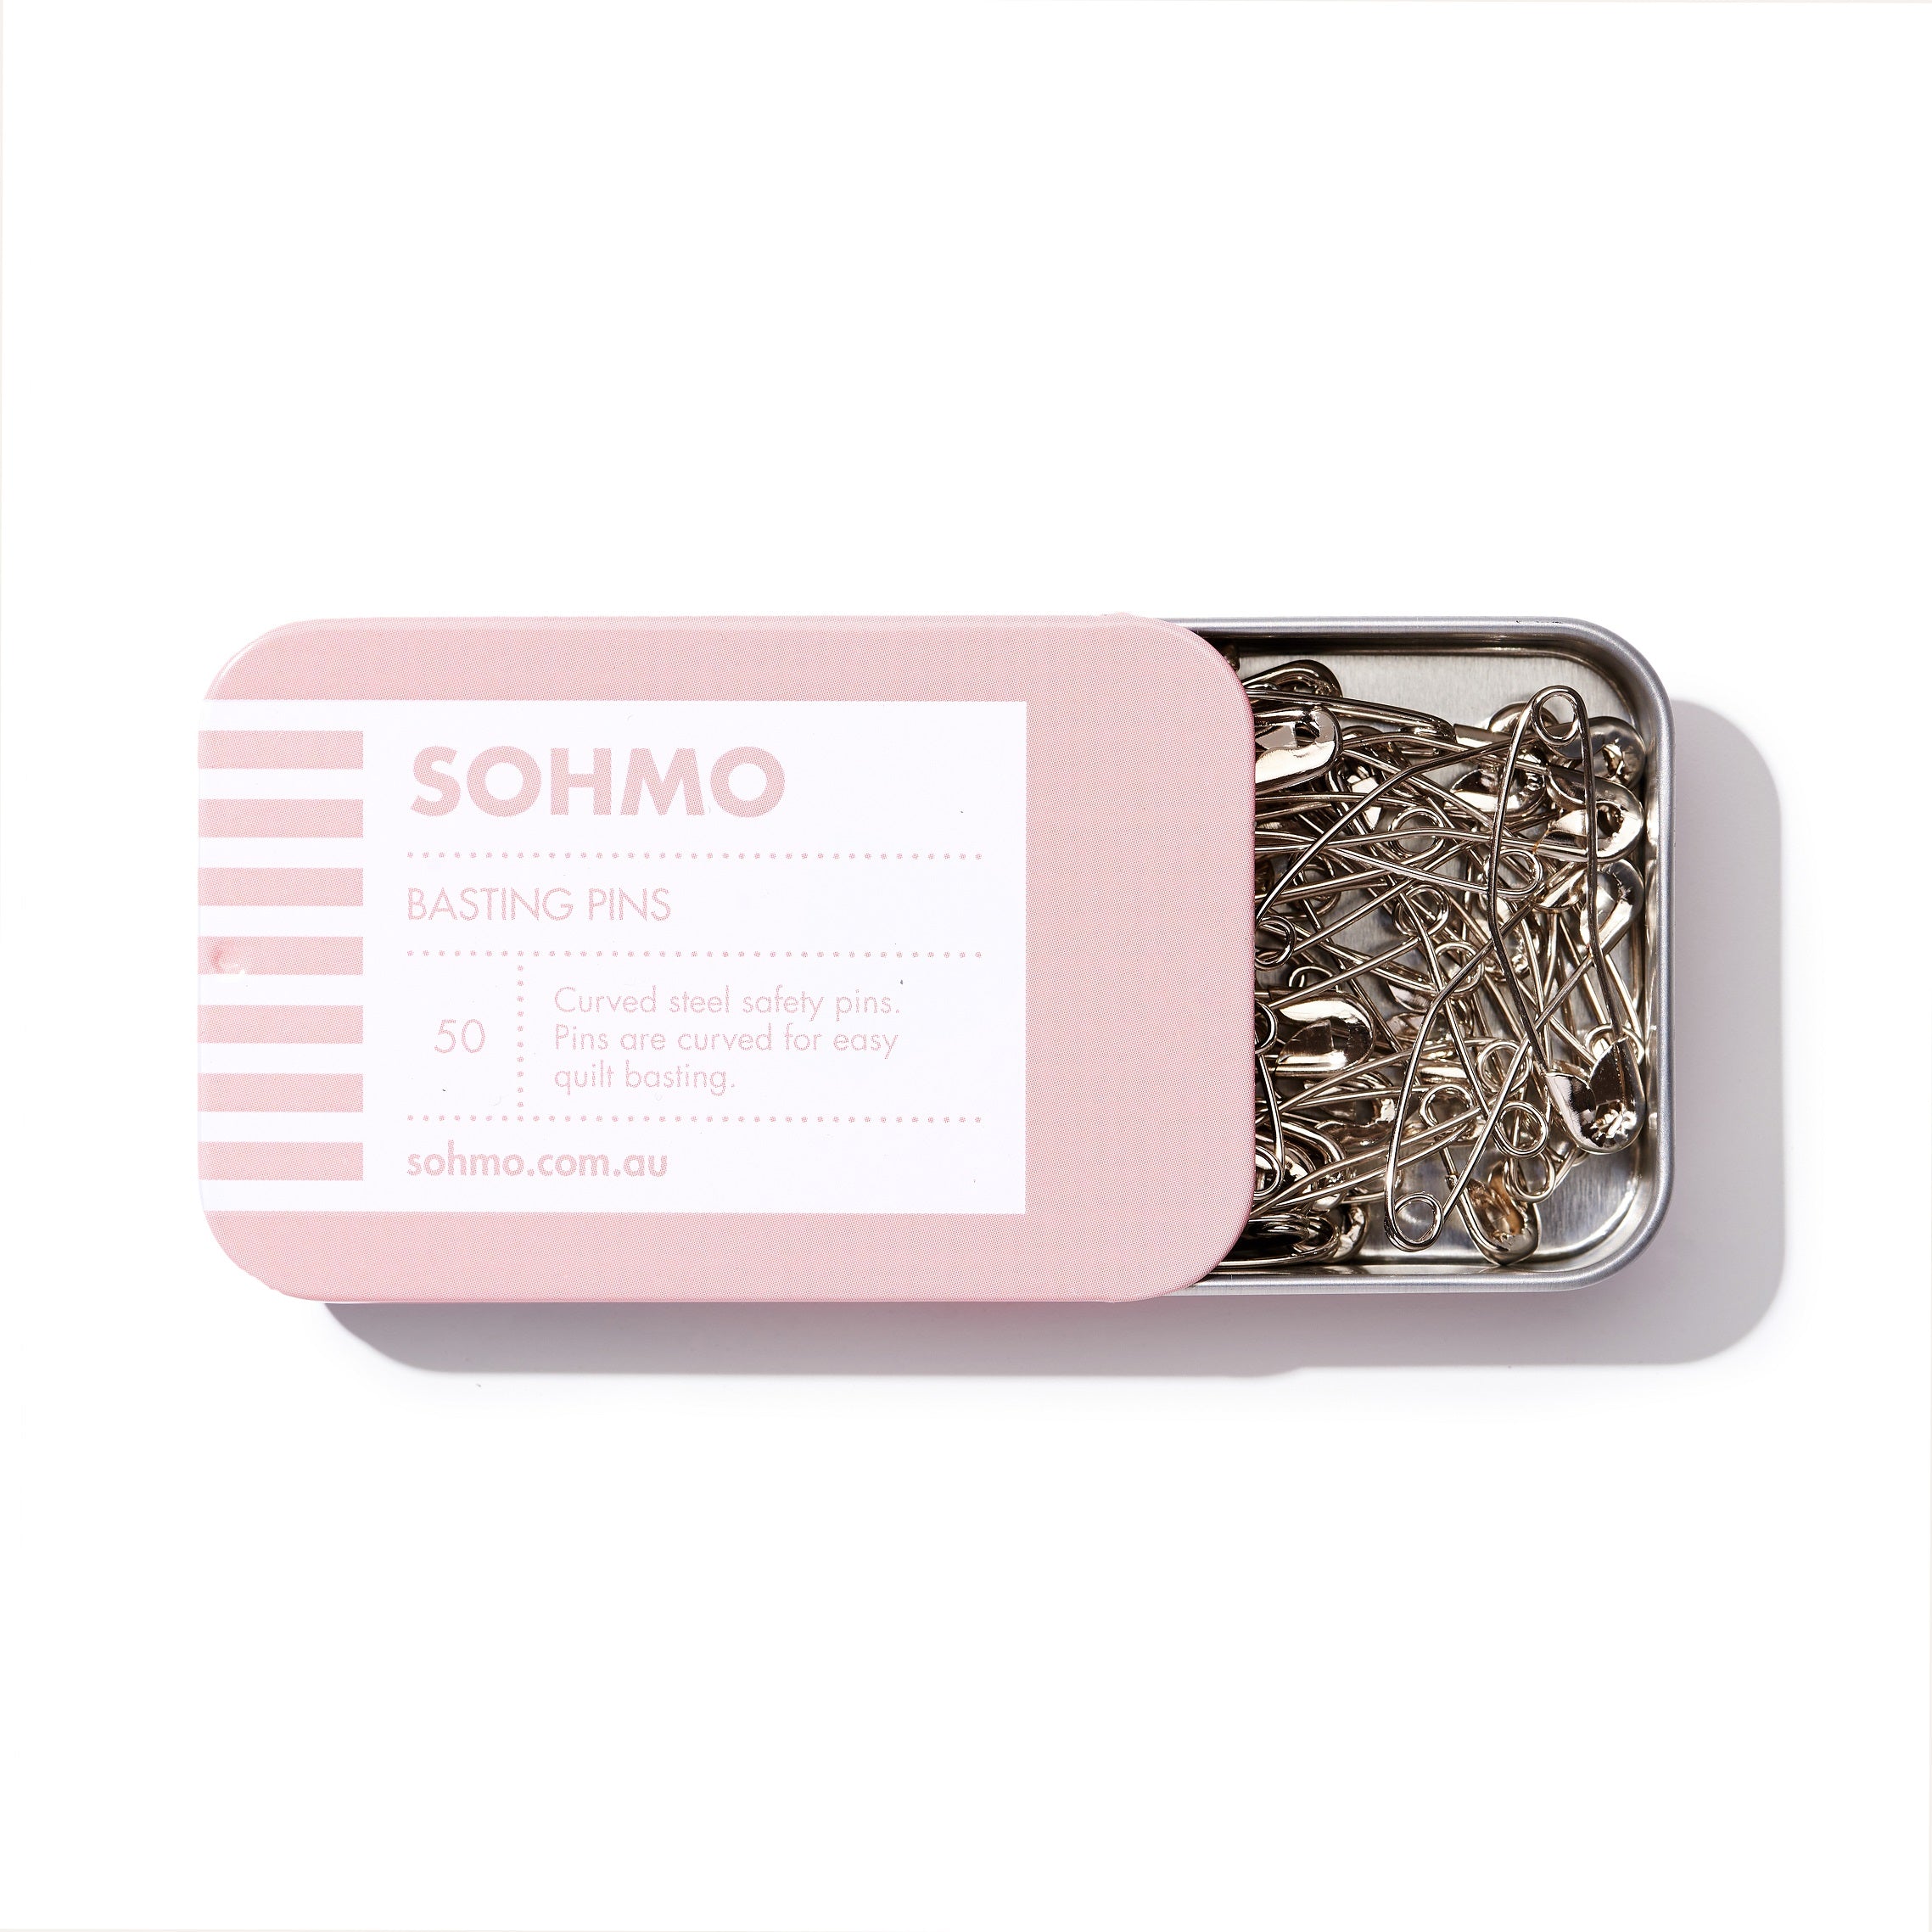 SOHMO curved basting pins in pink tin